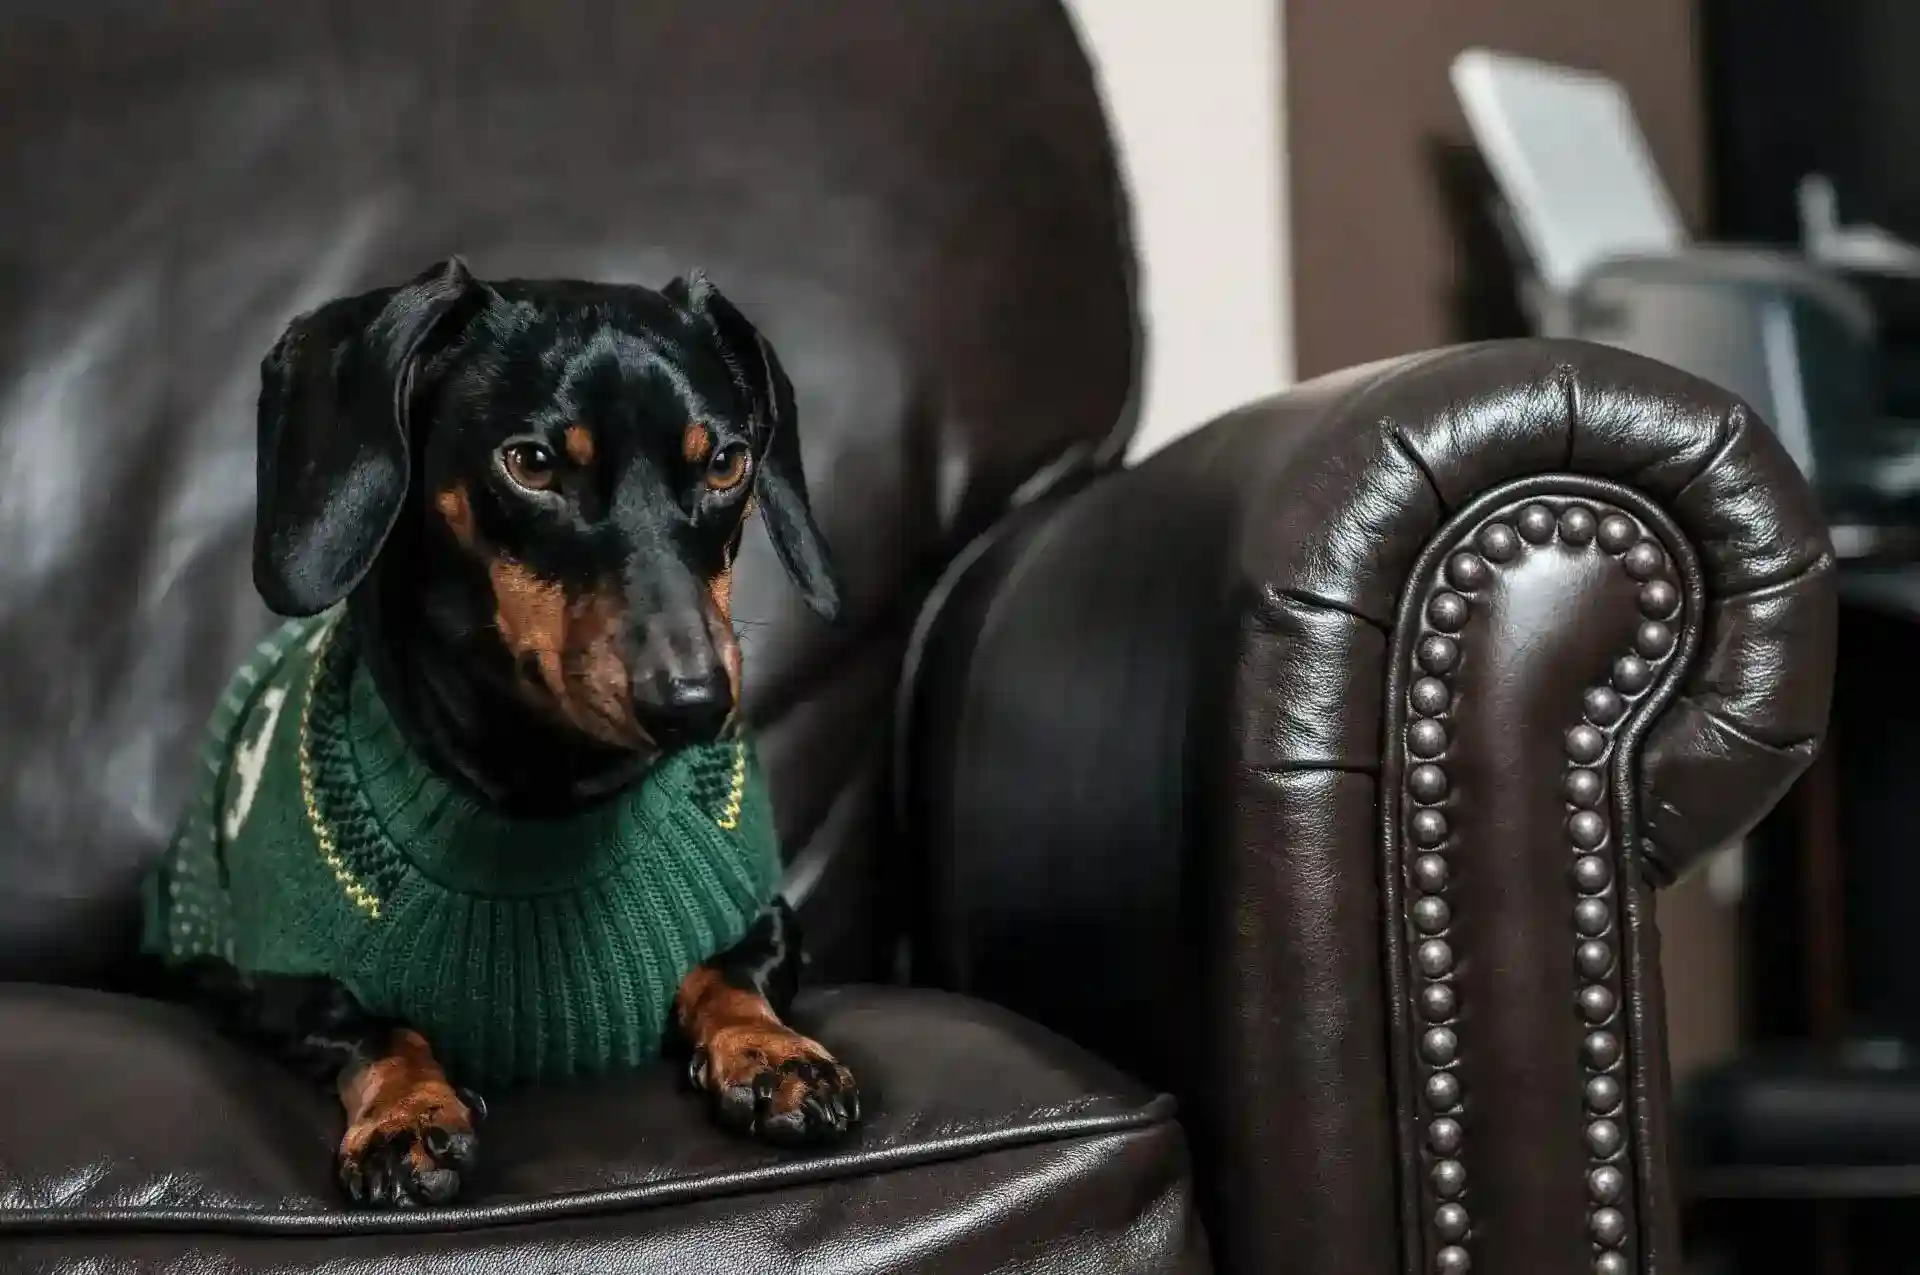 Dog wearing a green knitted sweater